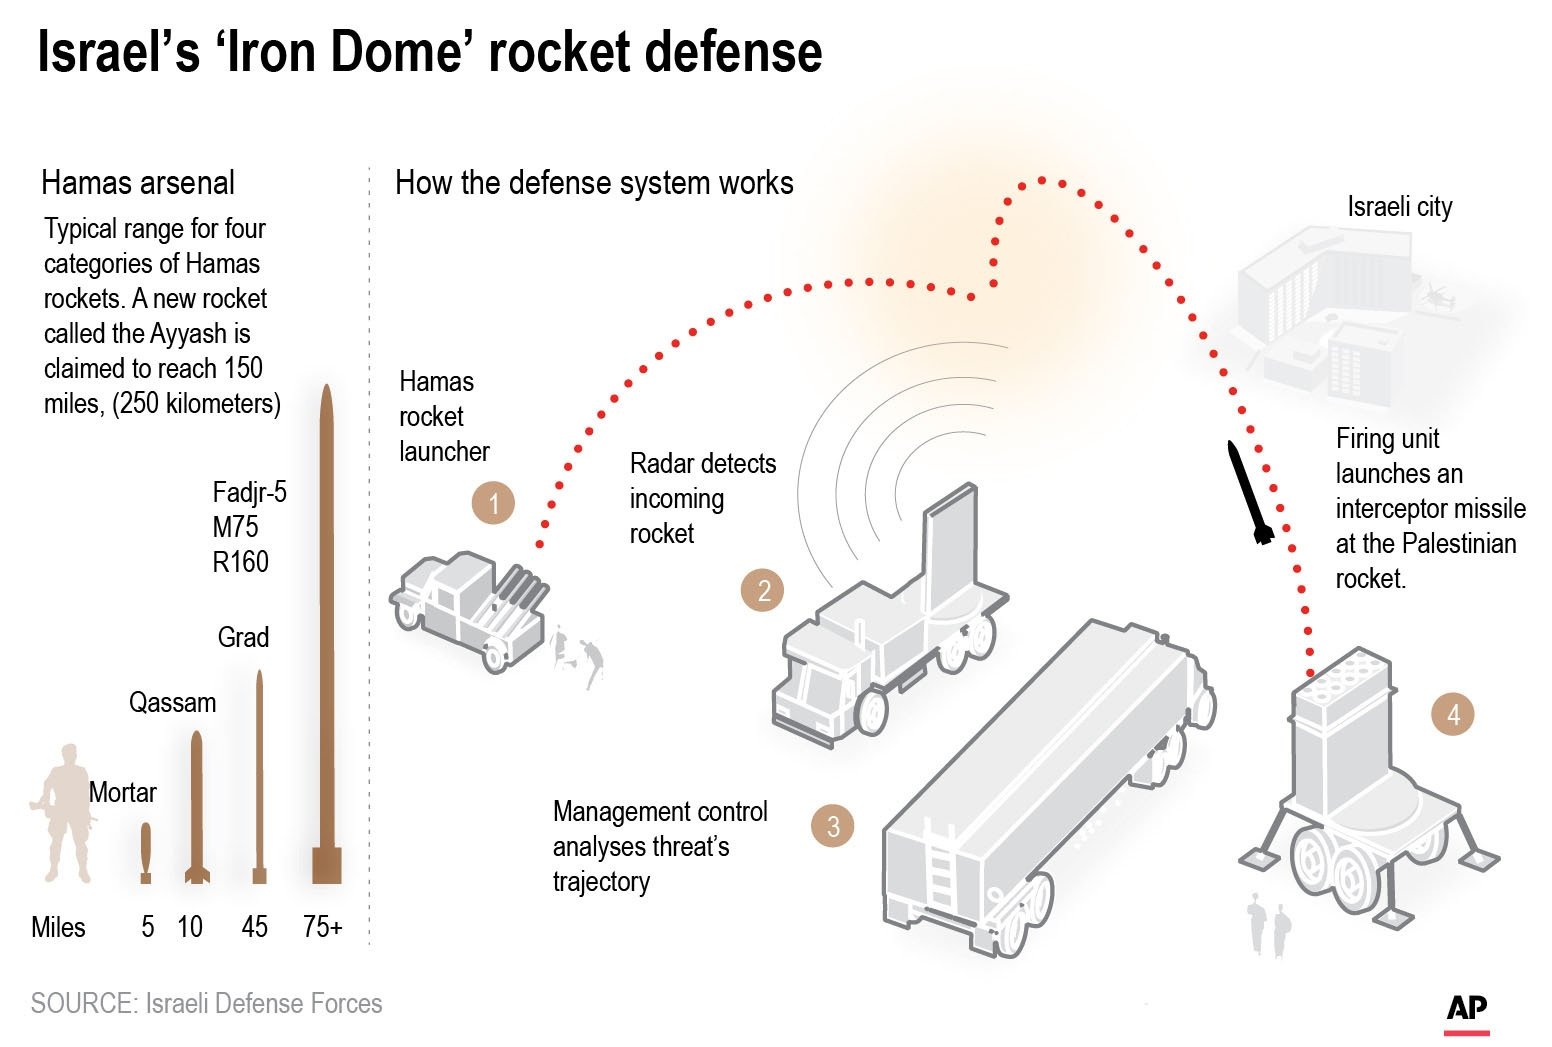 Graphic explains Israel’s Iron Dome air defense system. (Infographic by AP)